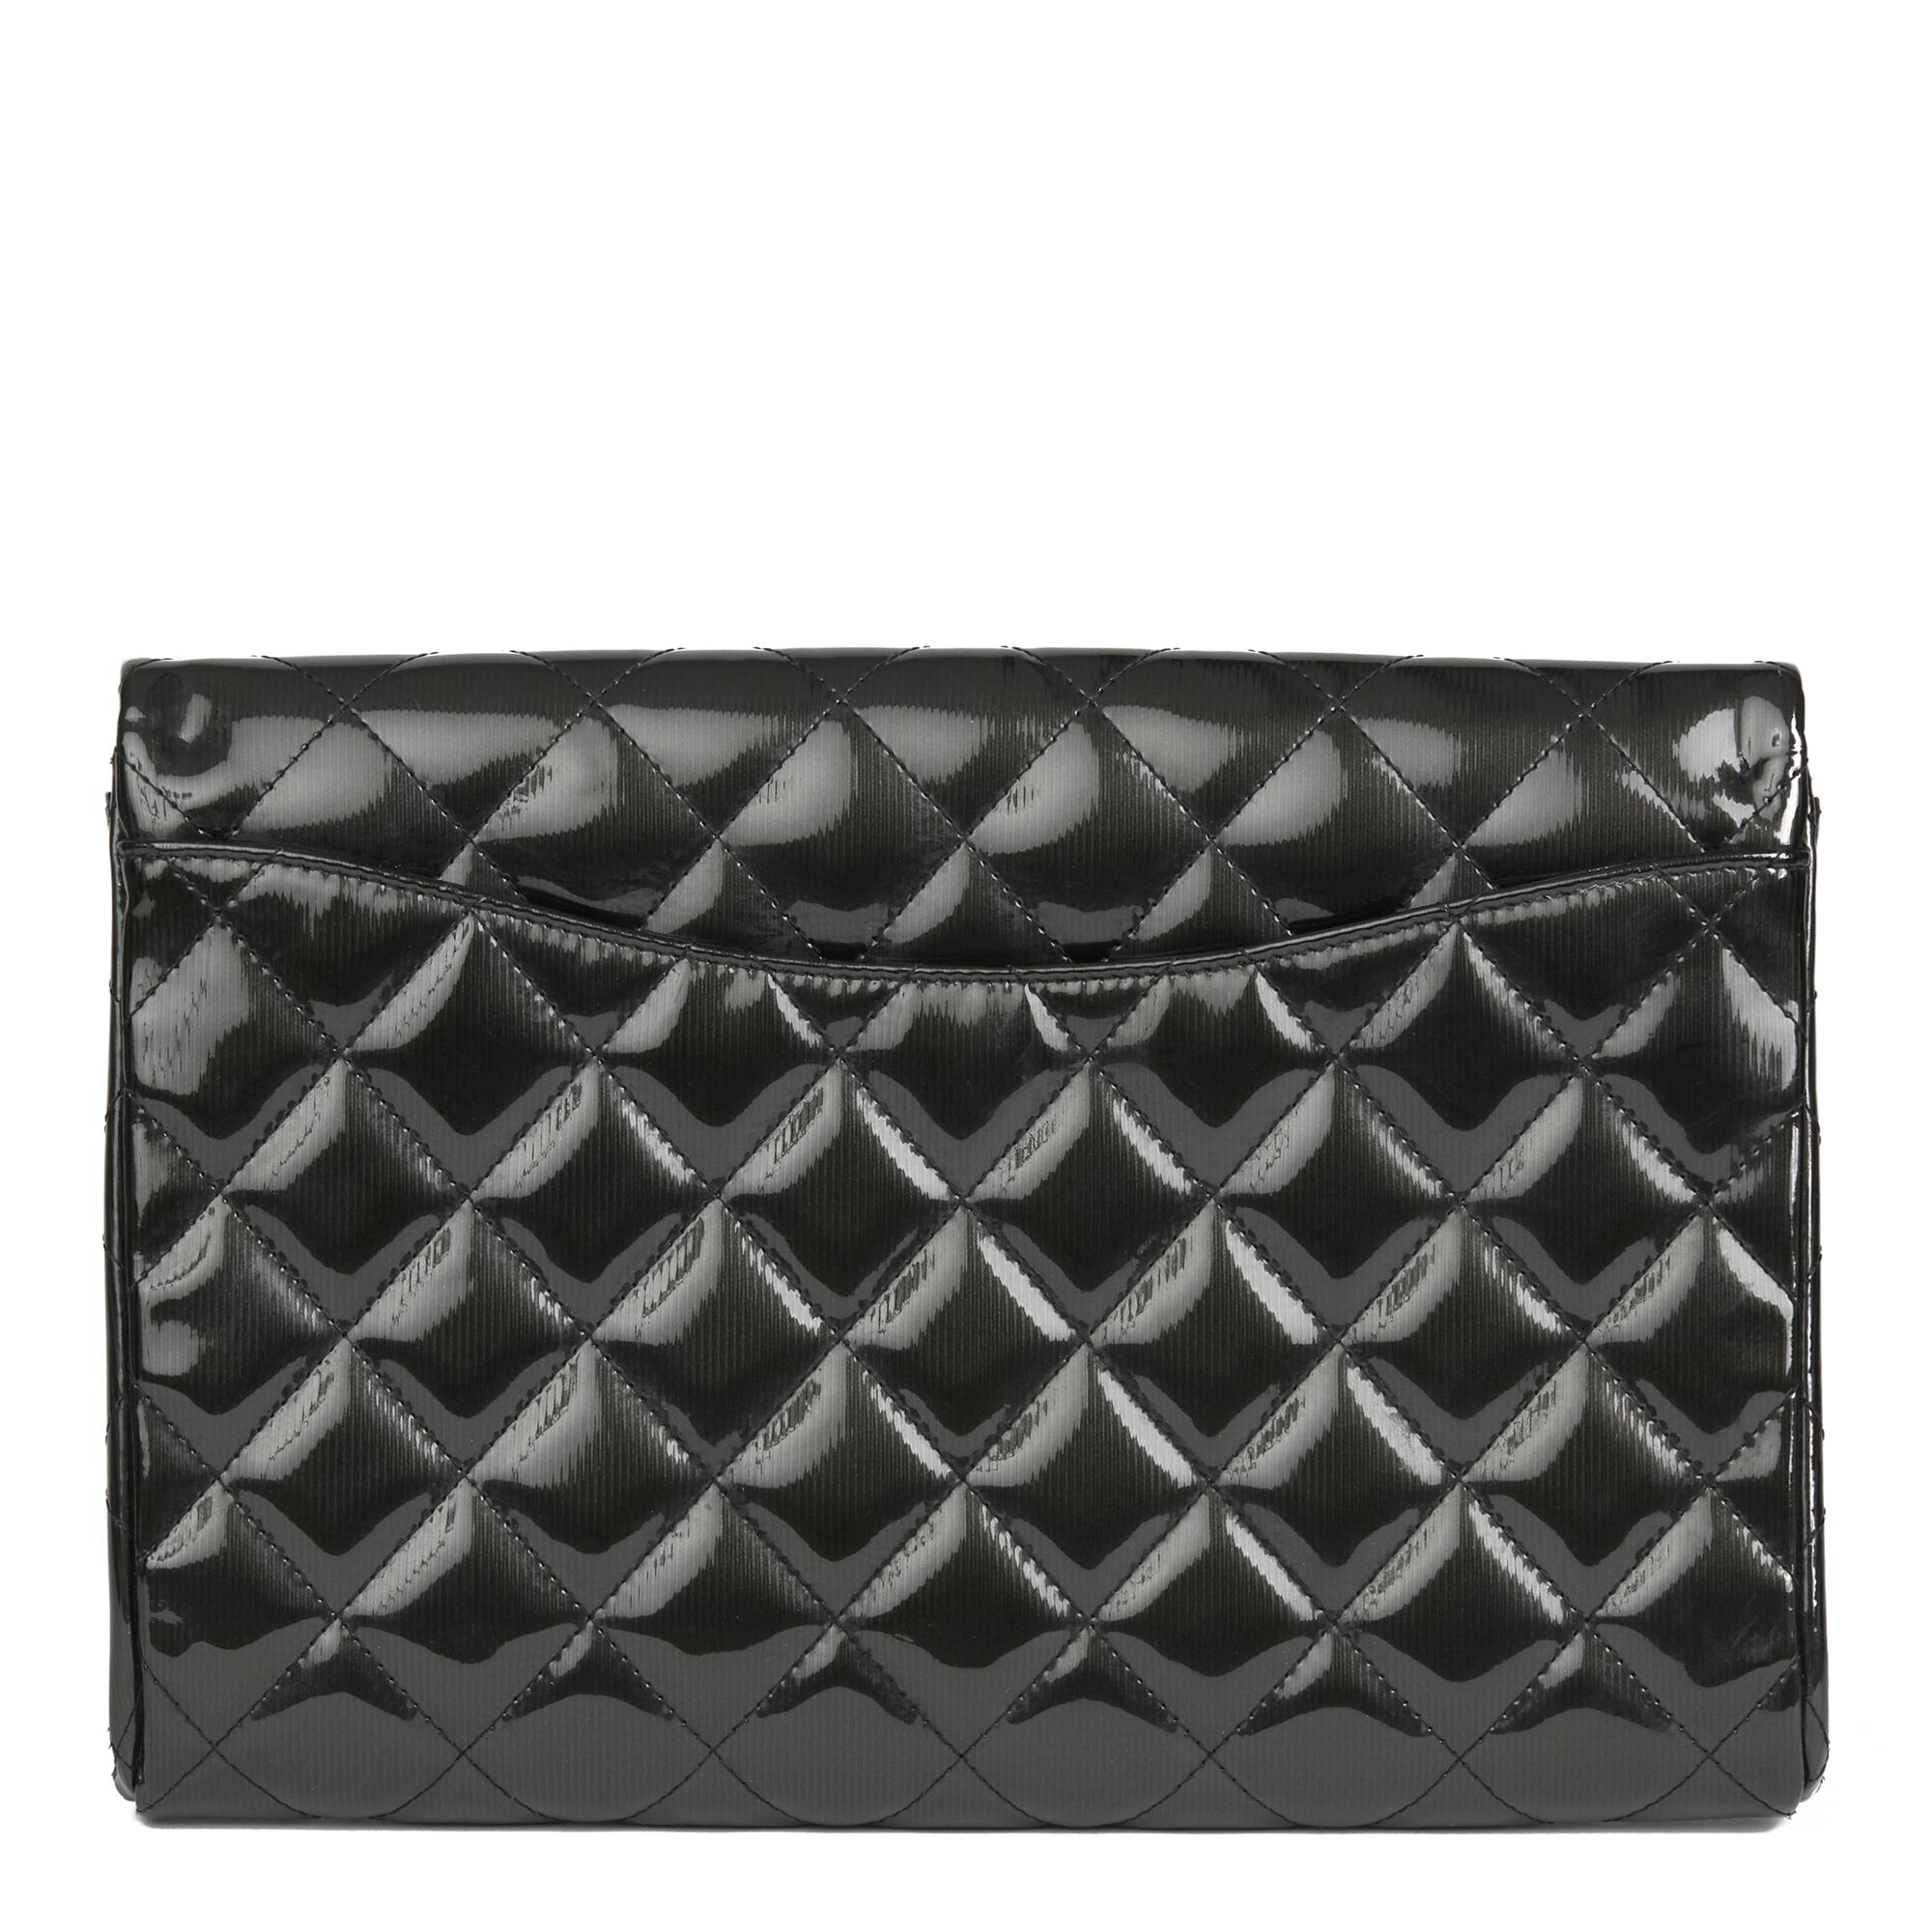 Women's 2012 Chanel Black Quilted Patent Leather Clutch-on-Chain